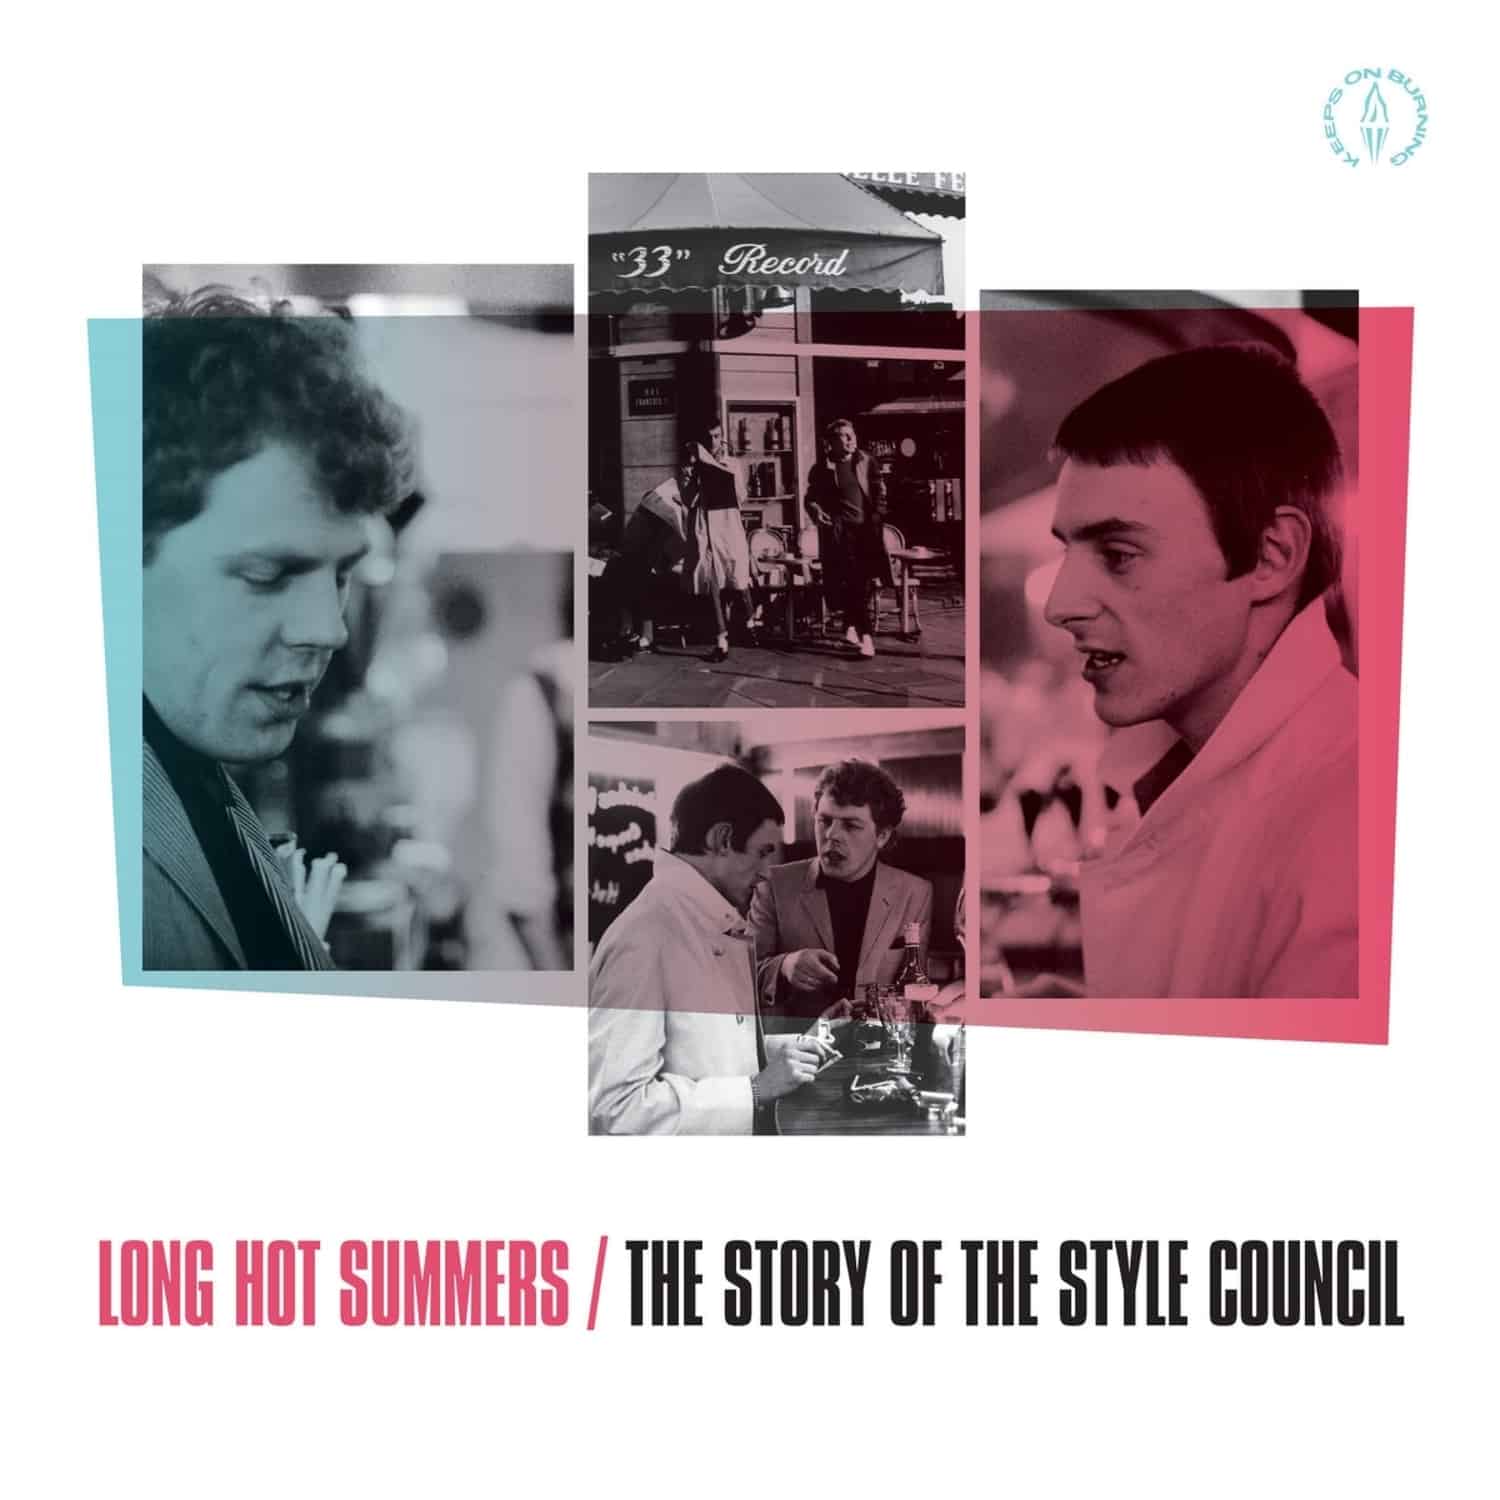 The Style Council - LONG HOT SUMMERS: STORY OF THE STYLE COUNCIL 